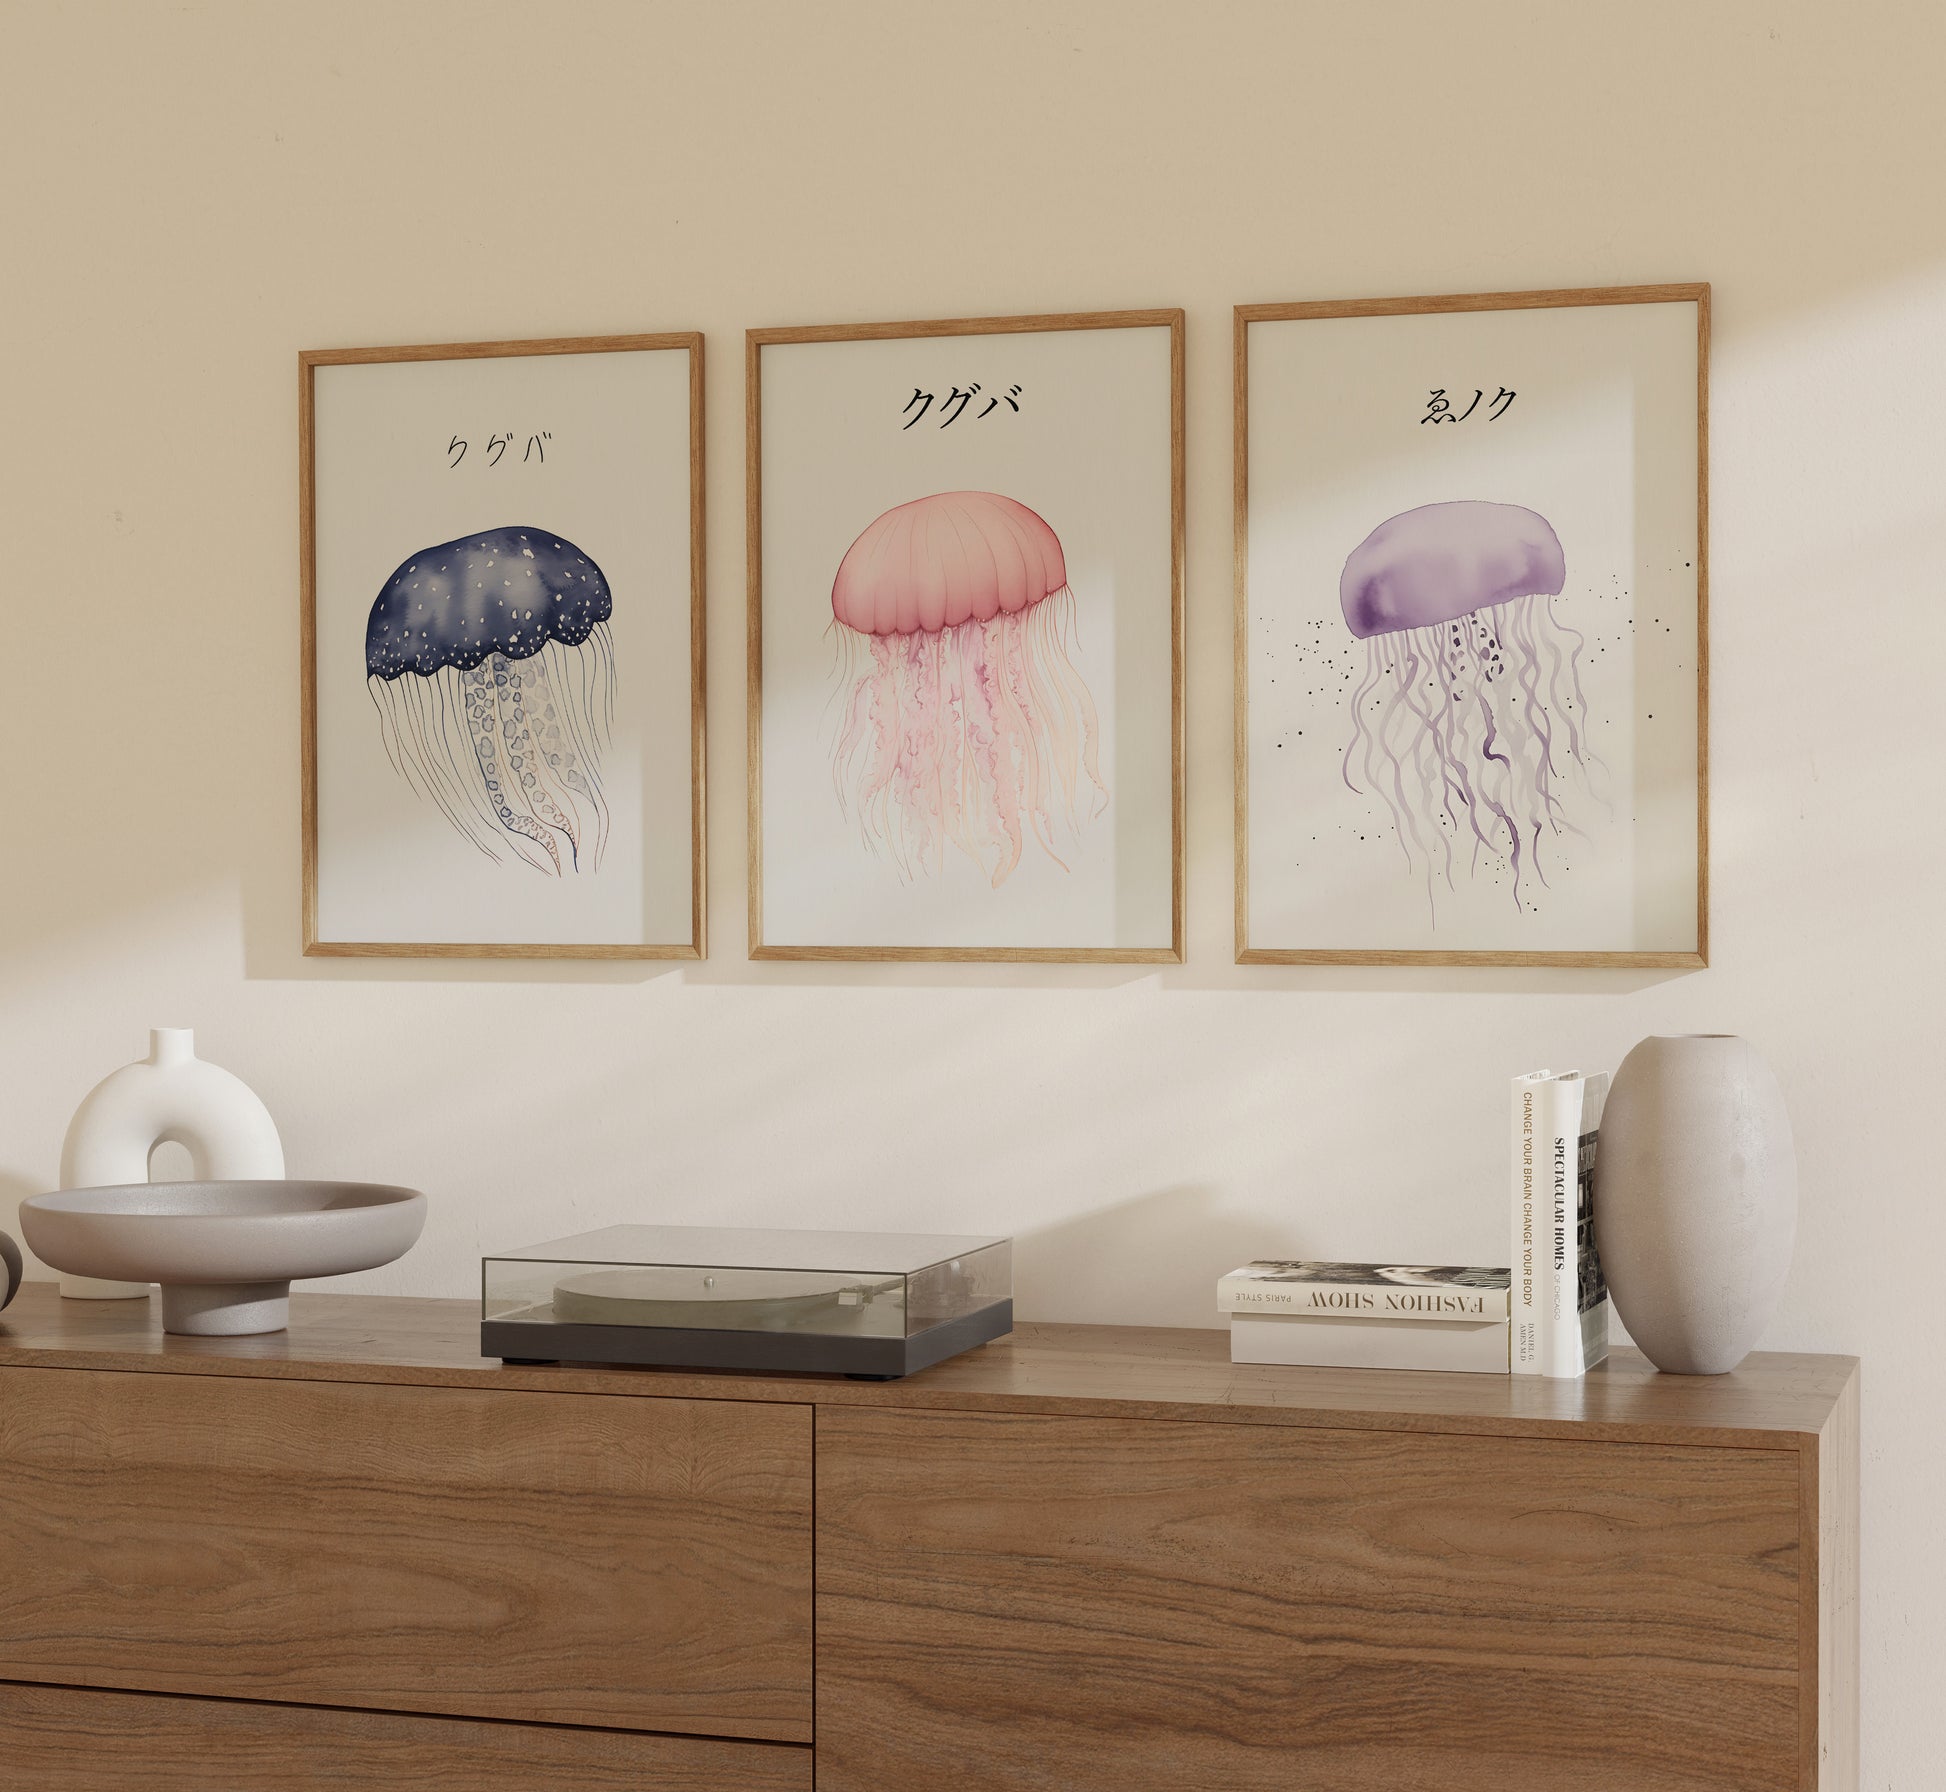 Three framed illustrations of jellyfish on a wall above a wooden sideboard.